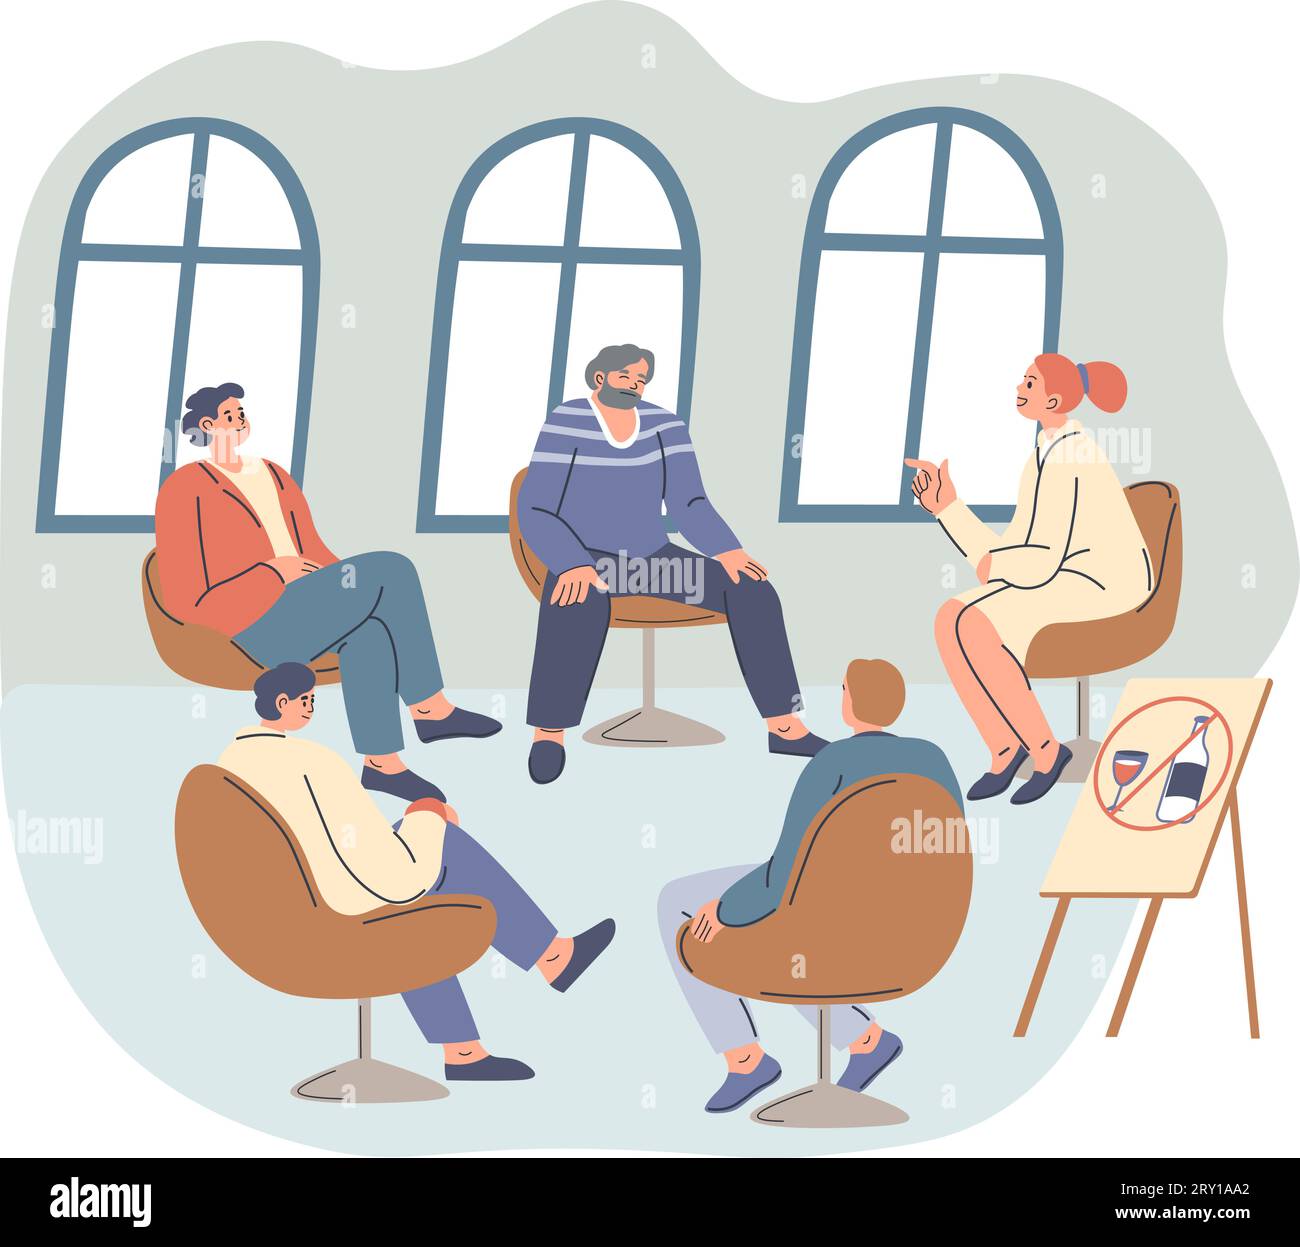 Anonymous alcoholic clubs at meeting with people Stock Vector